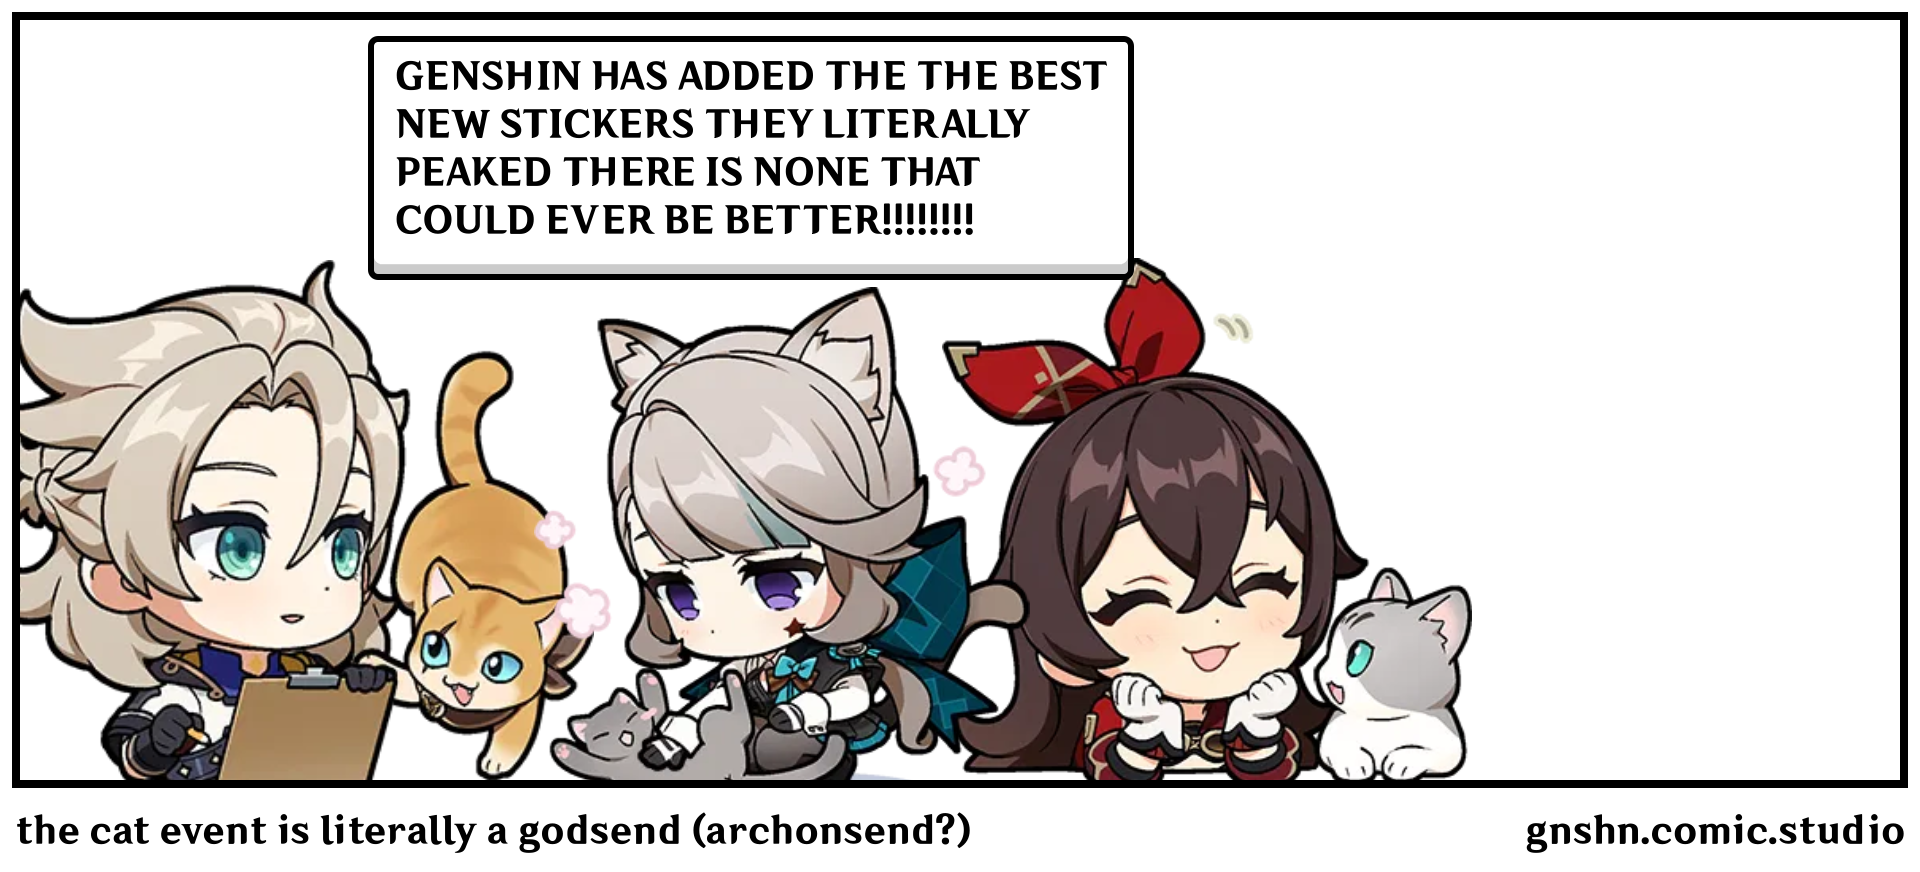 the cat event is literally a godsend (archonsend?)